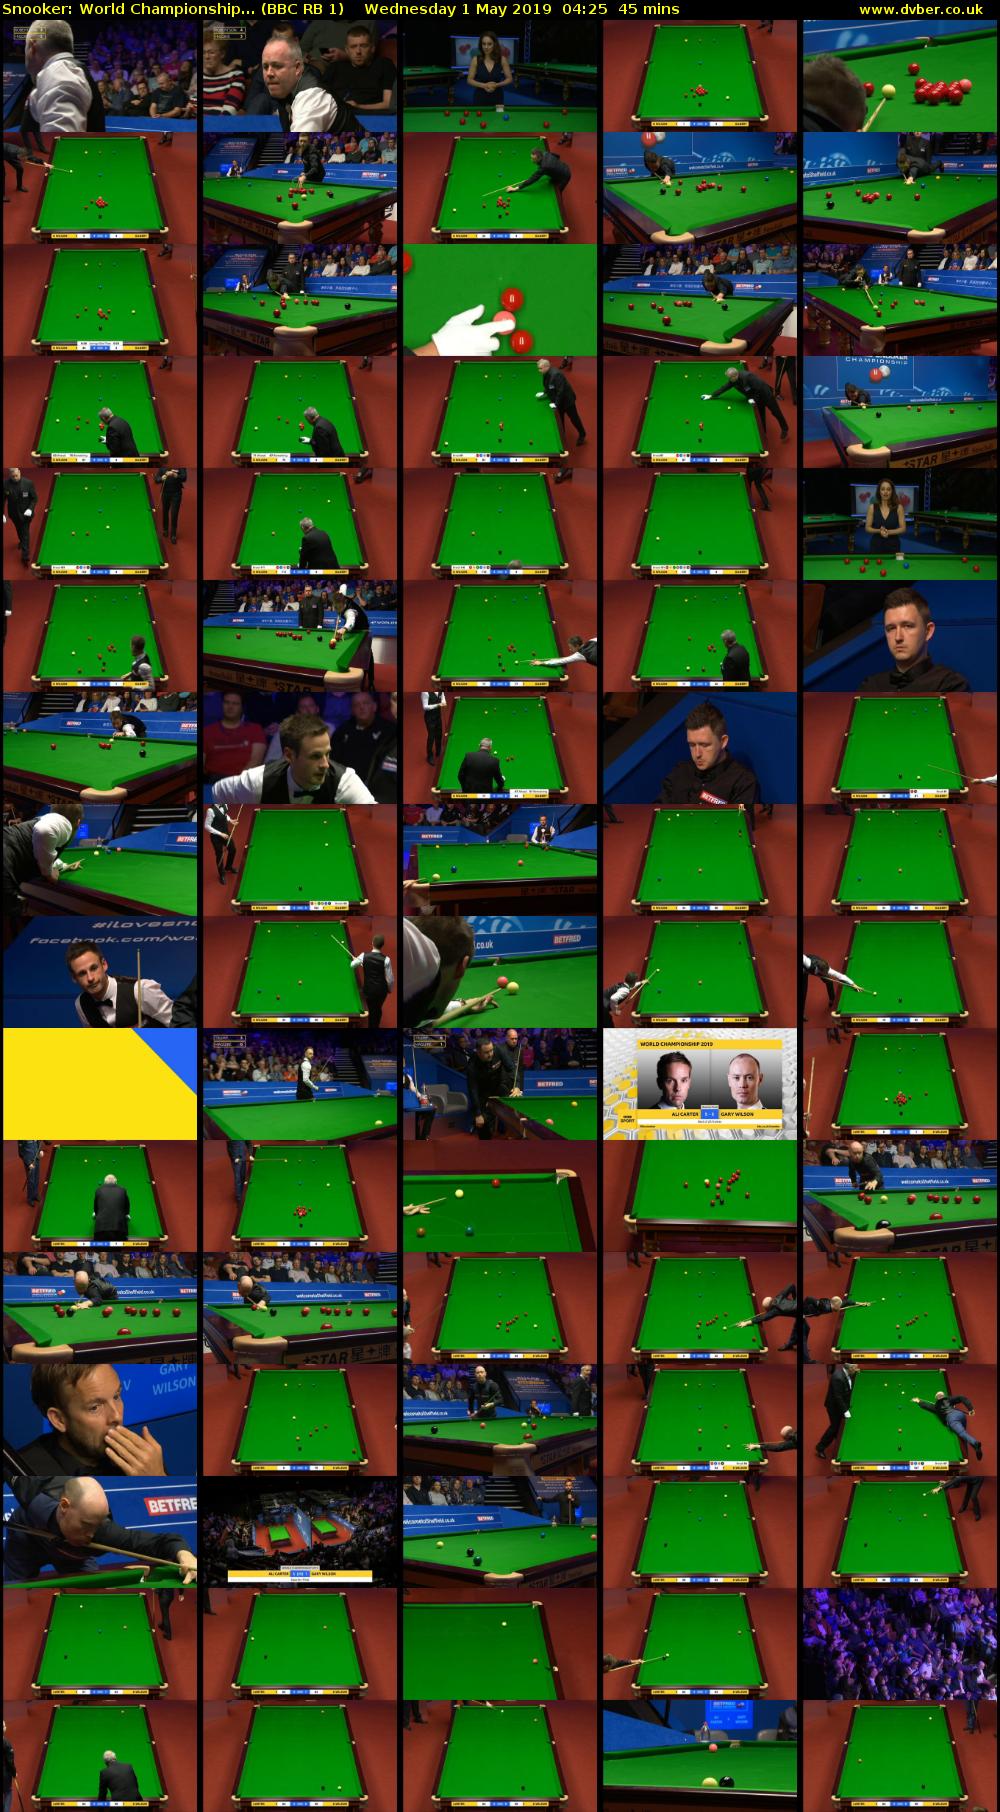 Snooker: World Championship... (BBC RB 1) Wednesday 1 May 2019 04:25 - 05:10